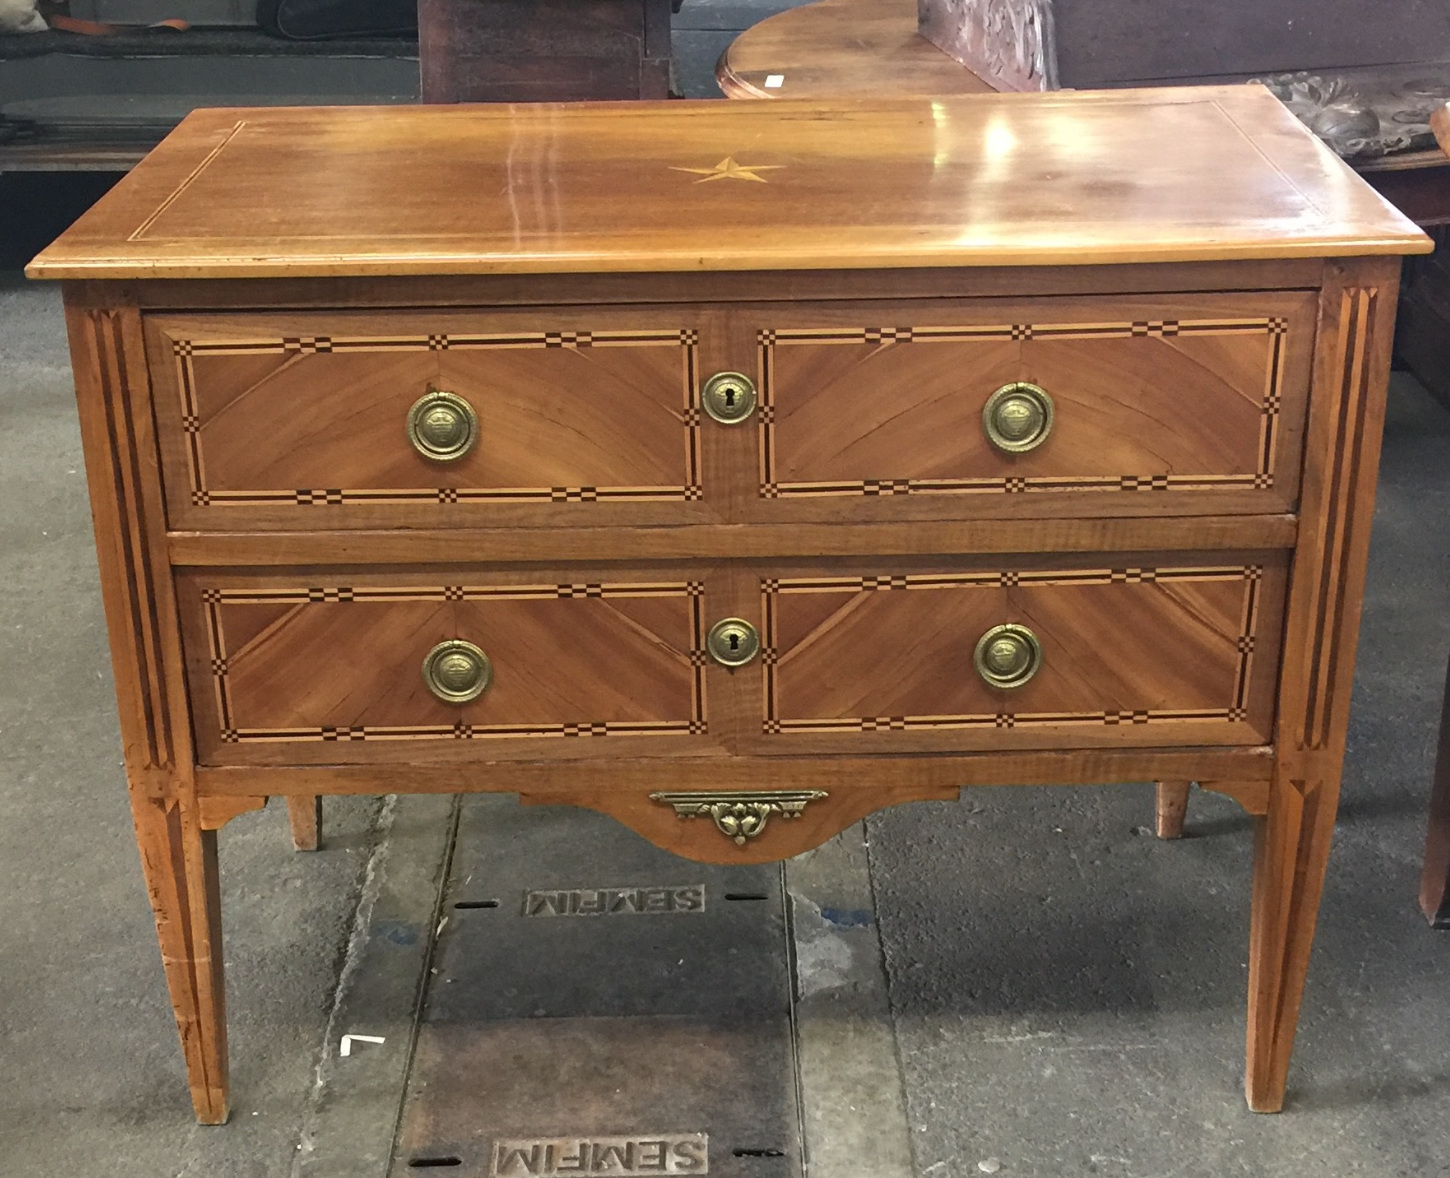 A beautiful <a href="https://huffharrington.com/collections/furniture/products/louis-xvi-commode-with-noyer-marquetry" target="_blank">Louis XVI sauteuse</a>. We said oui, oui, oui.